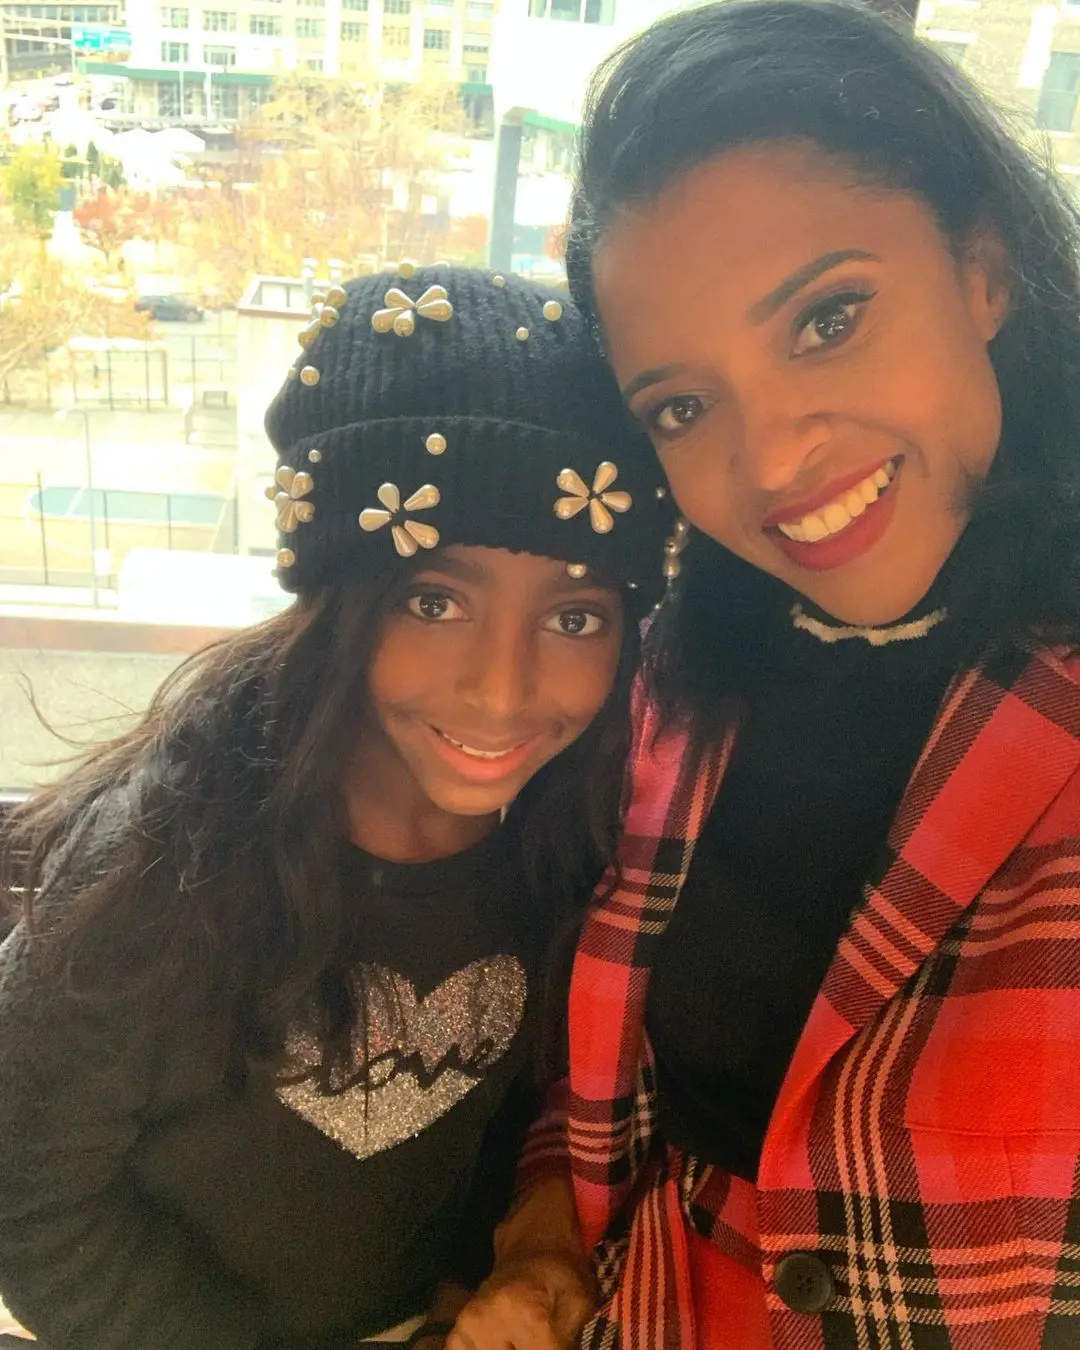 The Broadway actress shared a picture with her daughter spending time together on New York, Manhattan